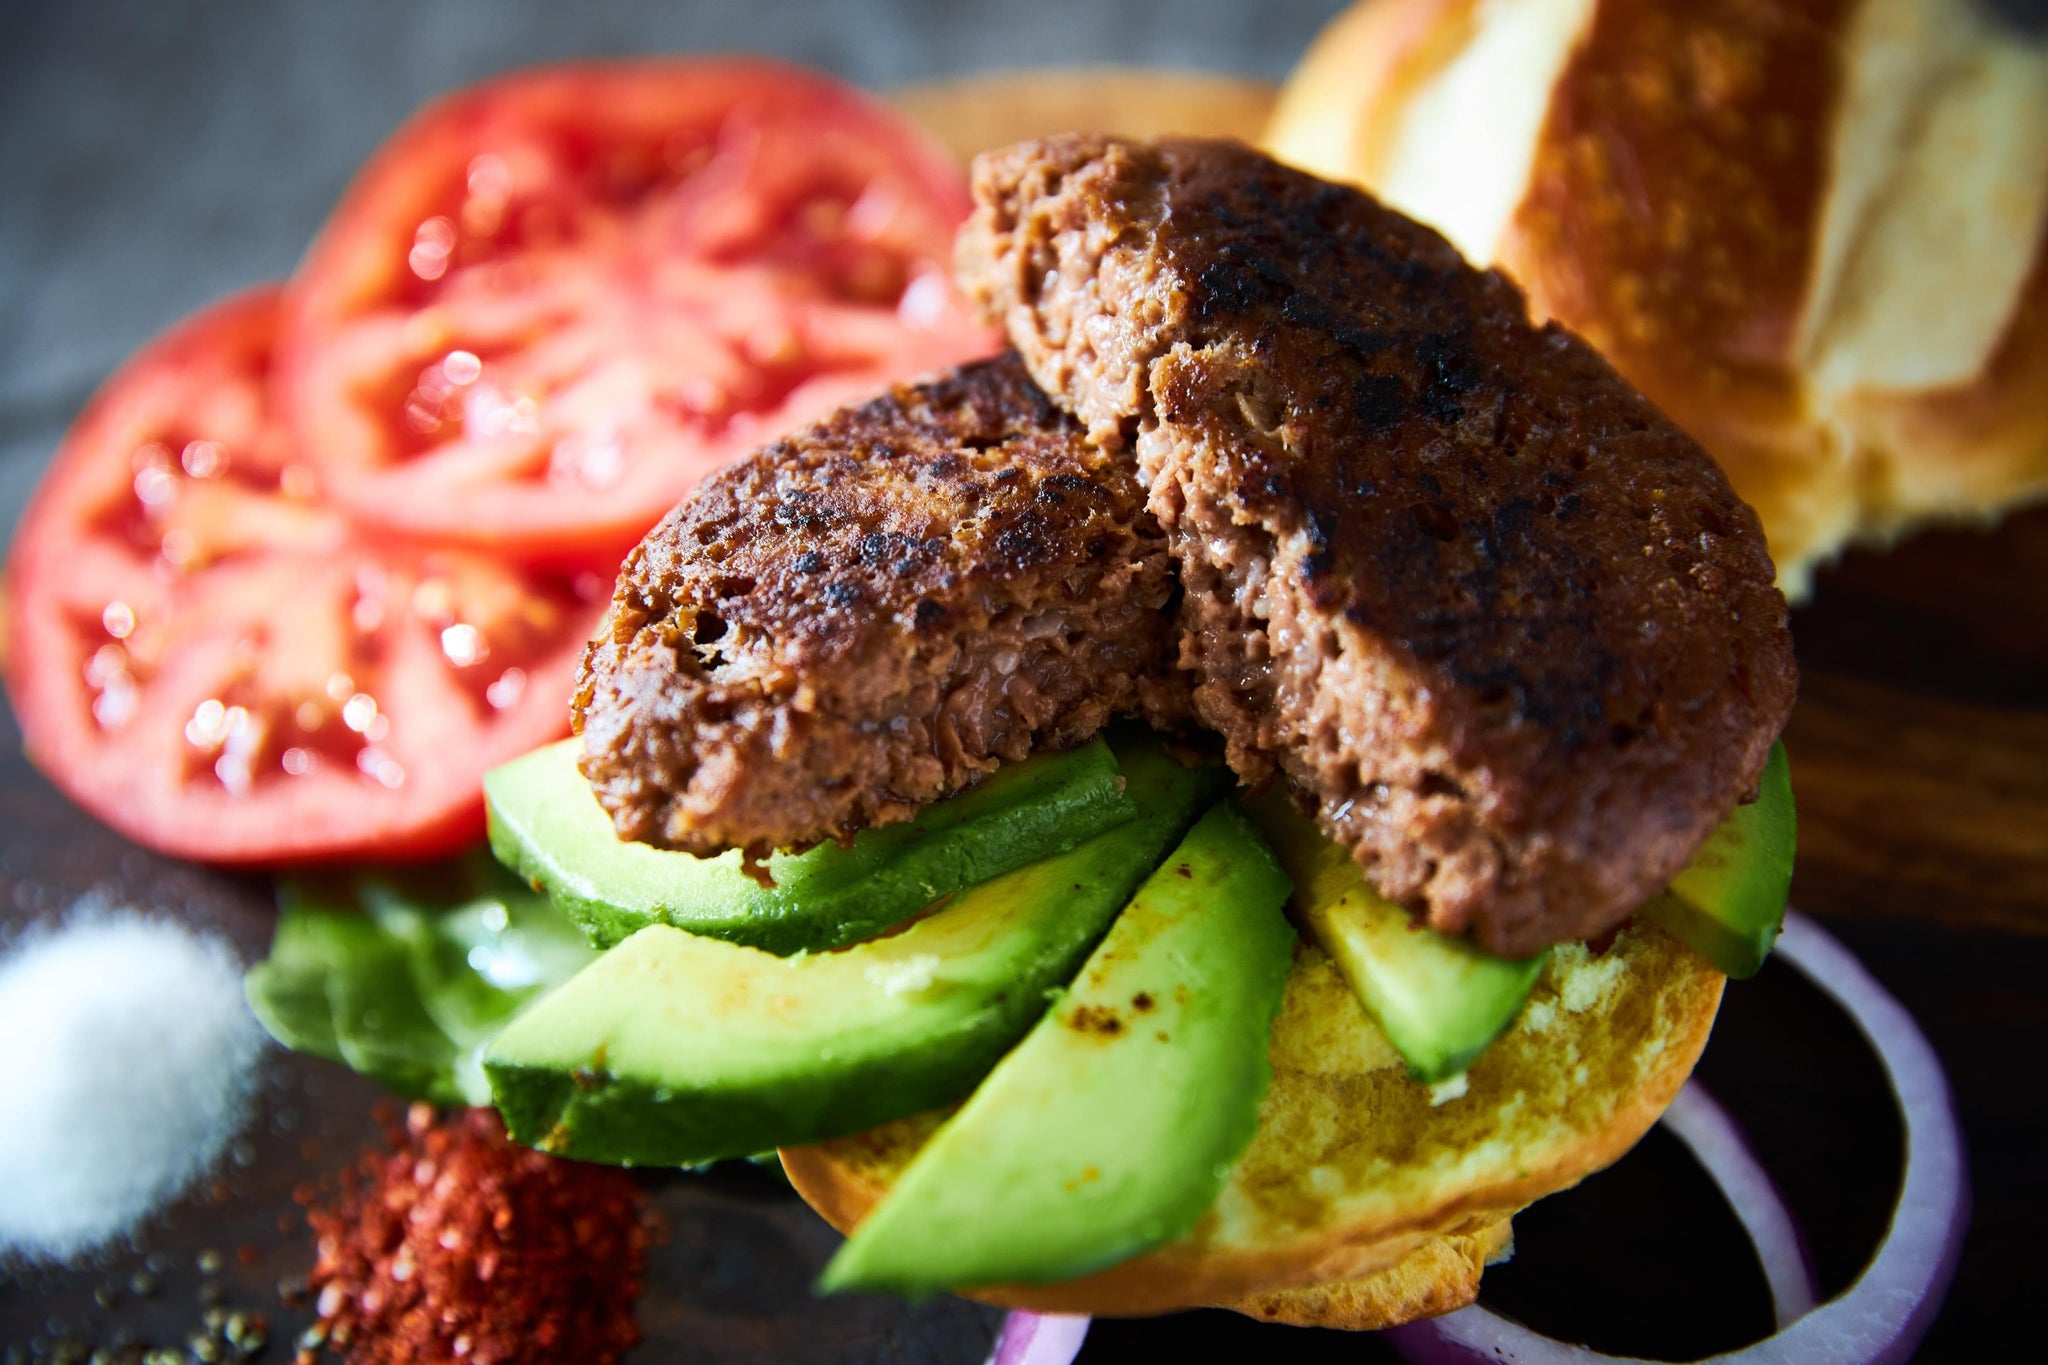 Acremade Plant-Based SoLow Burger